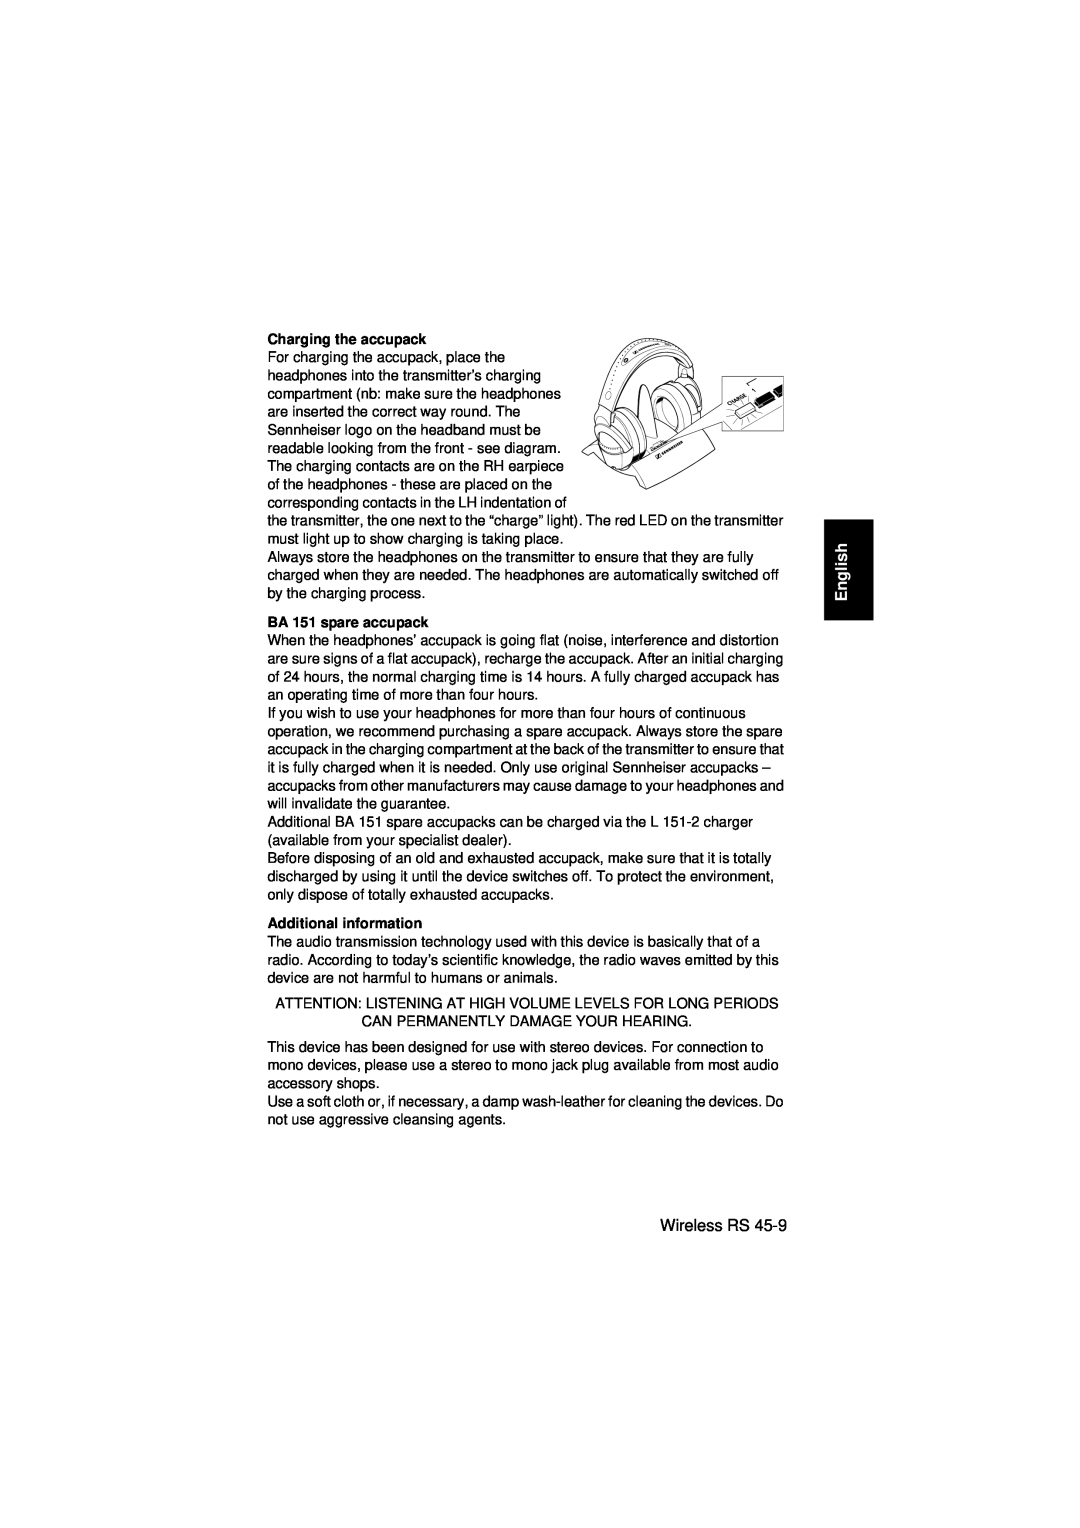 Sennheiser RS 45 instruction manual English, Wireless RS, BA 151 spare accupack, Additional information 